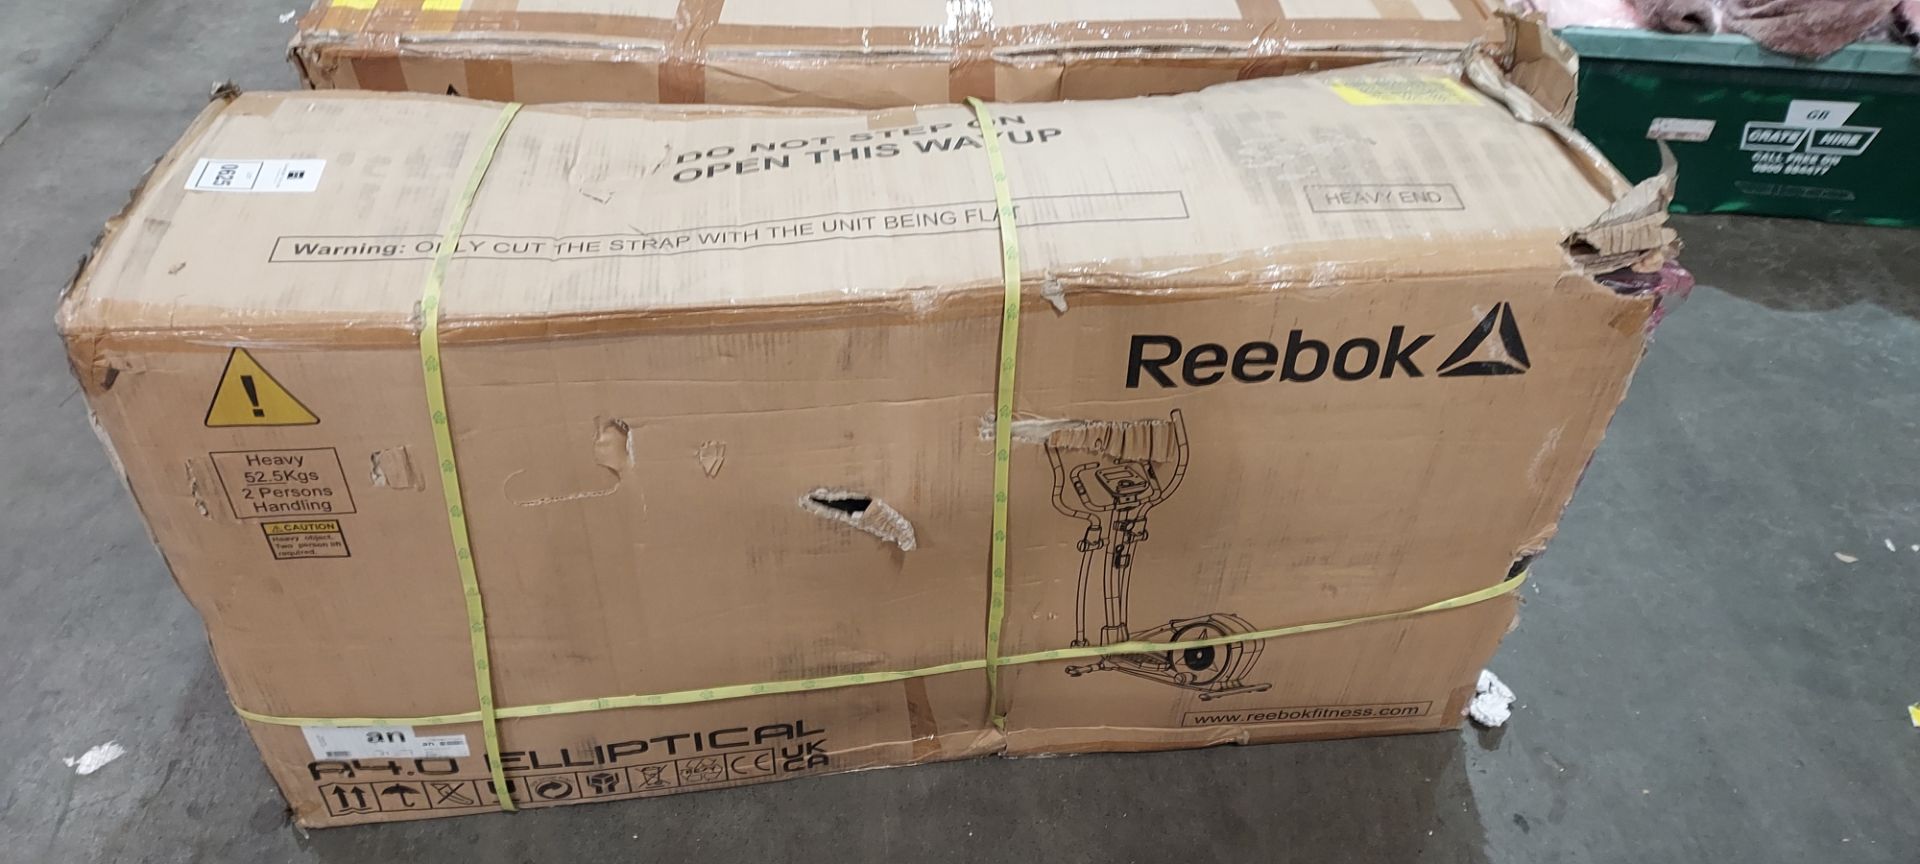 1 X BRAND NEW FACTORY SEALED REEBOK A4.0 CROSS FIT 00 IN SILVER GROSS WEIGHT 54 KGS (NOTE BOX IS - Image 2 of 2